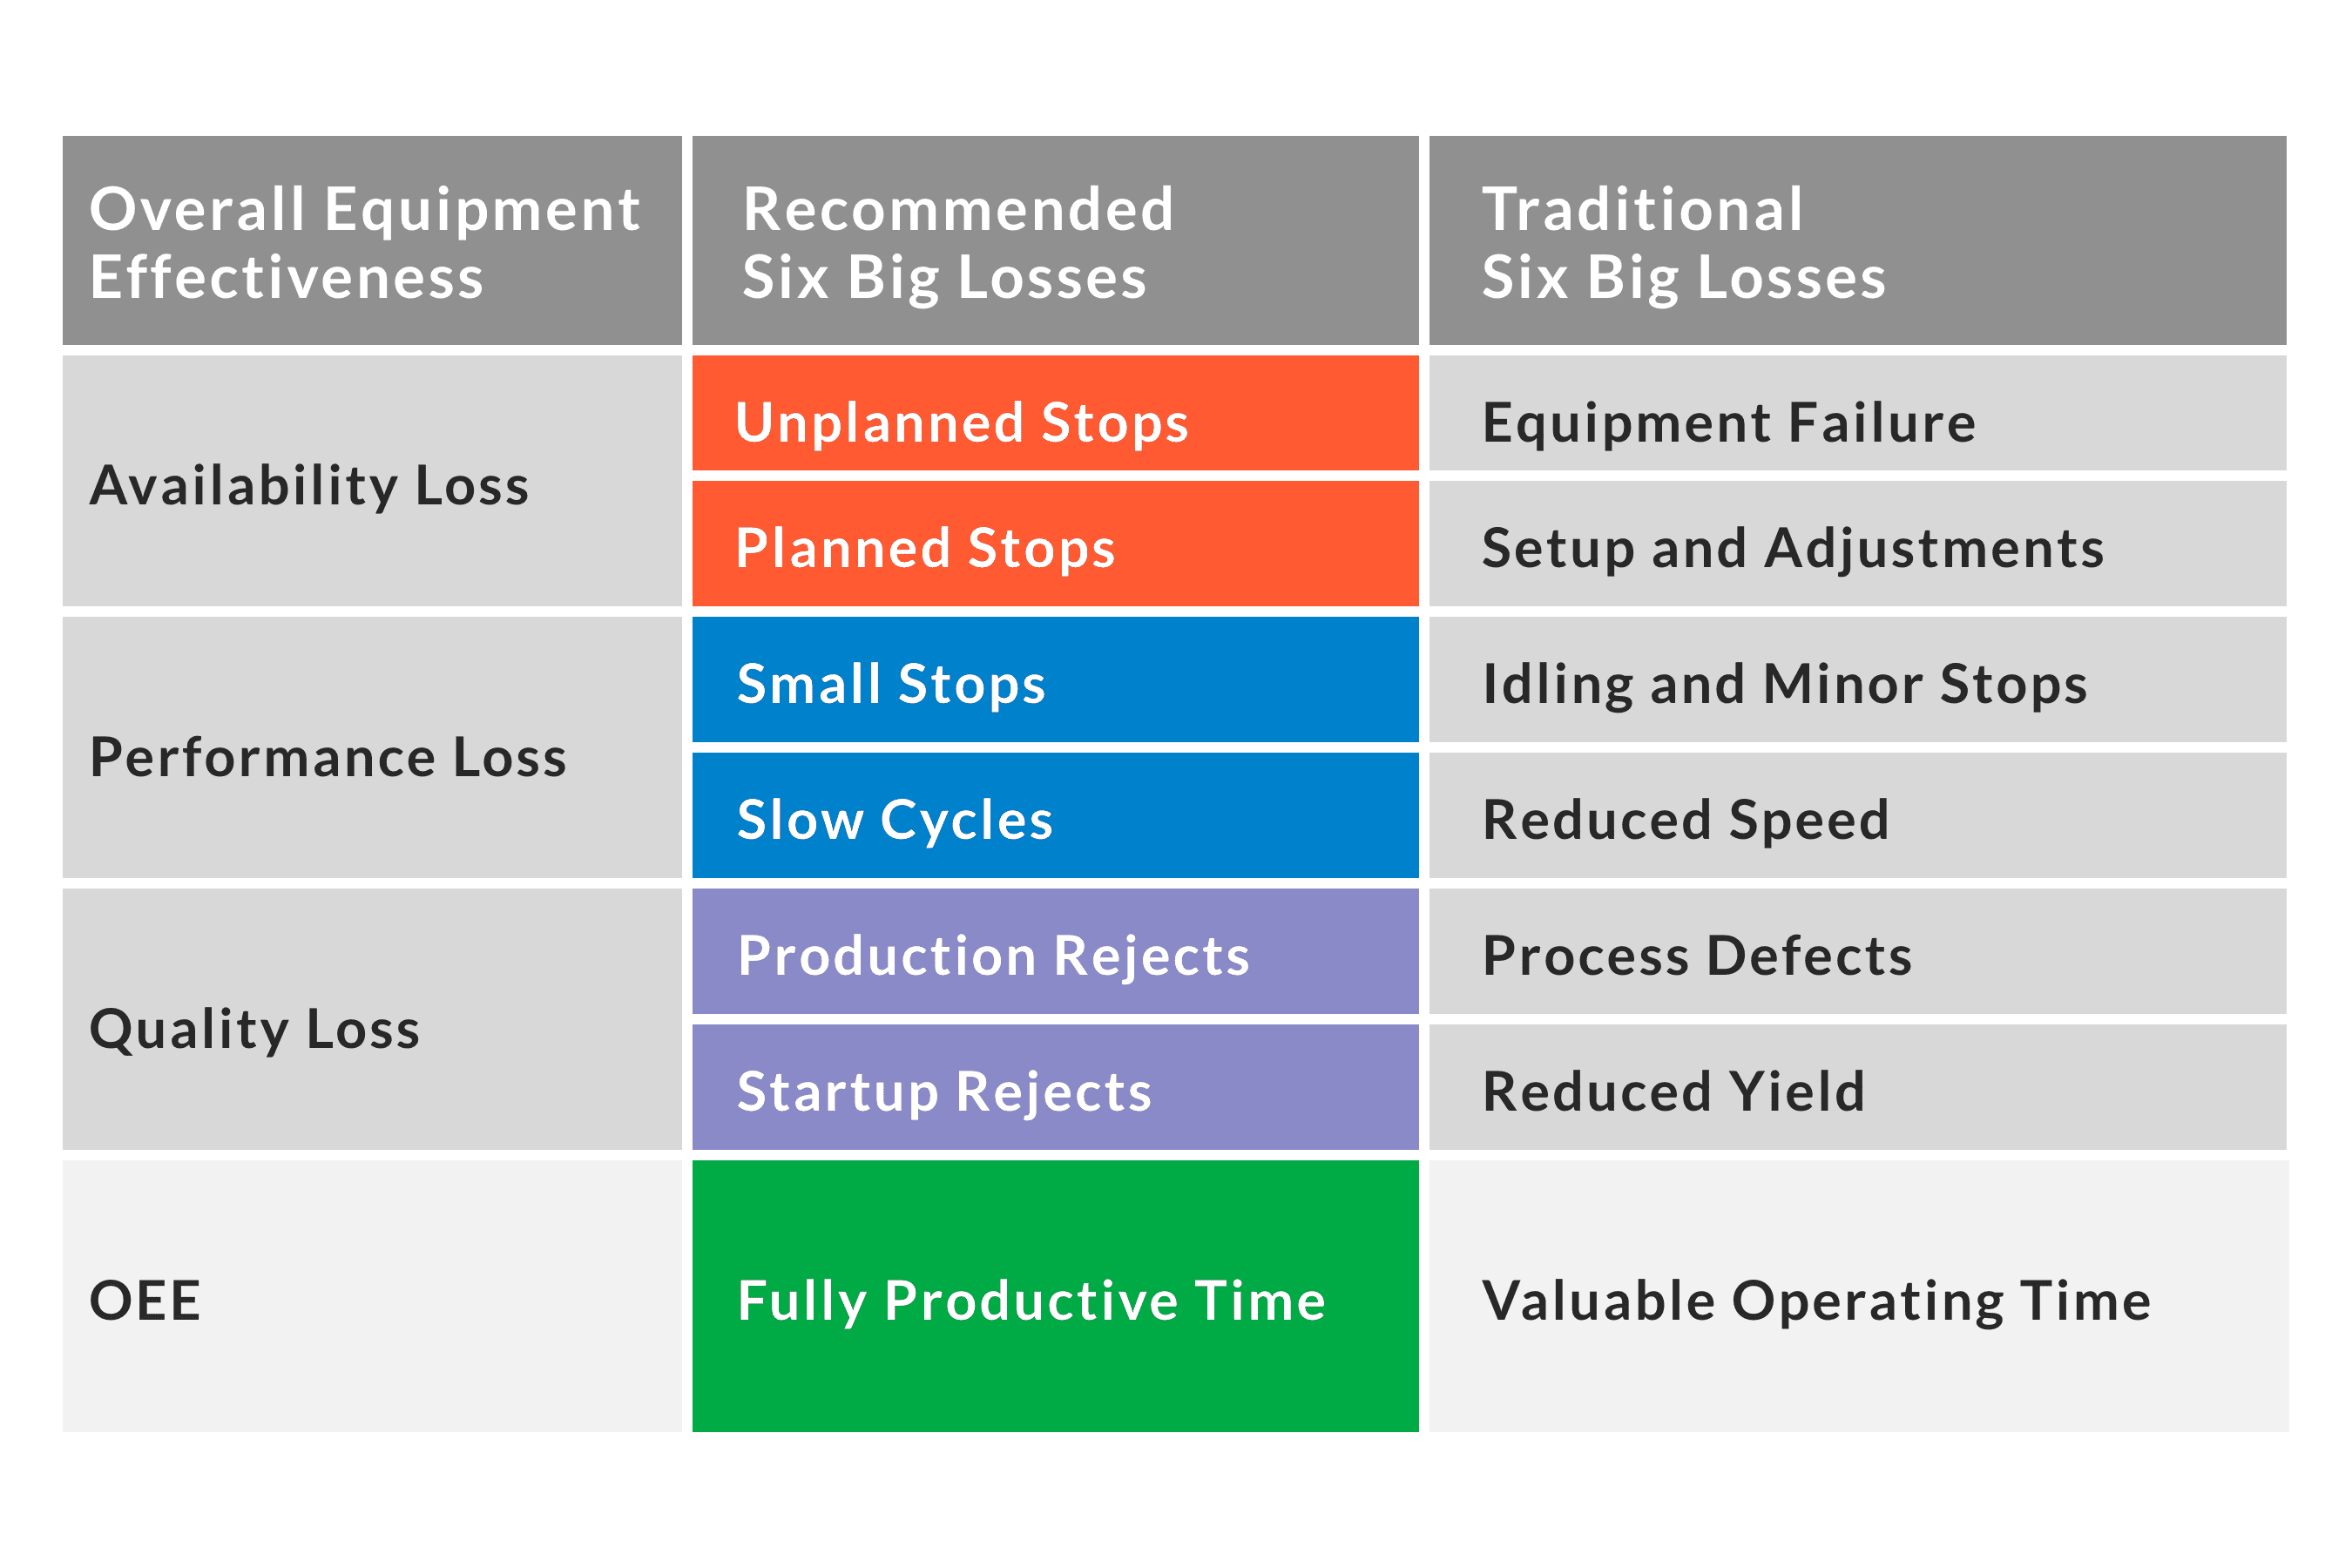 Chart of OEE Loss factors (Availability, Performance, and Quality) relative to the Six Big Losses